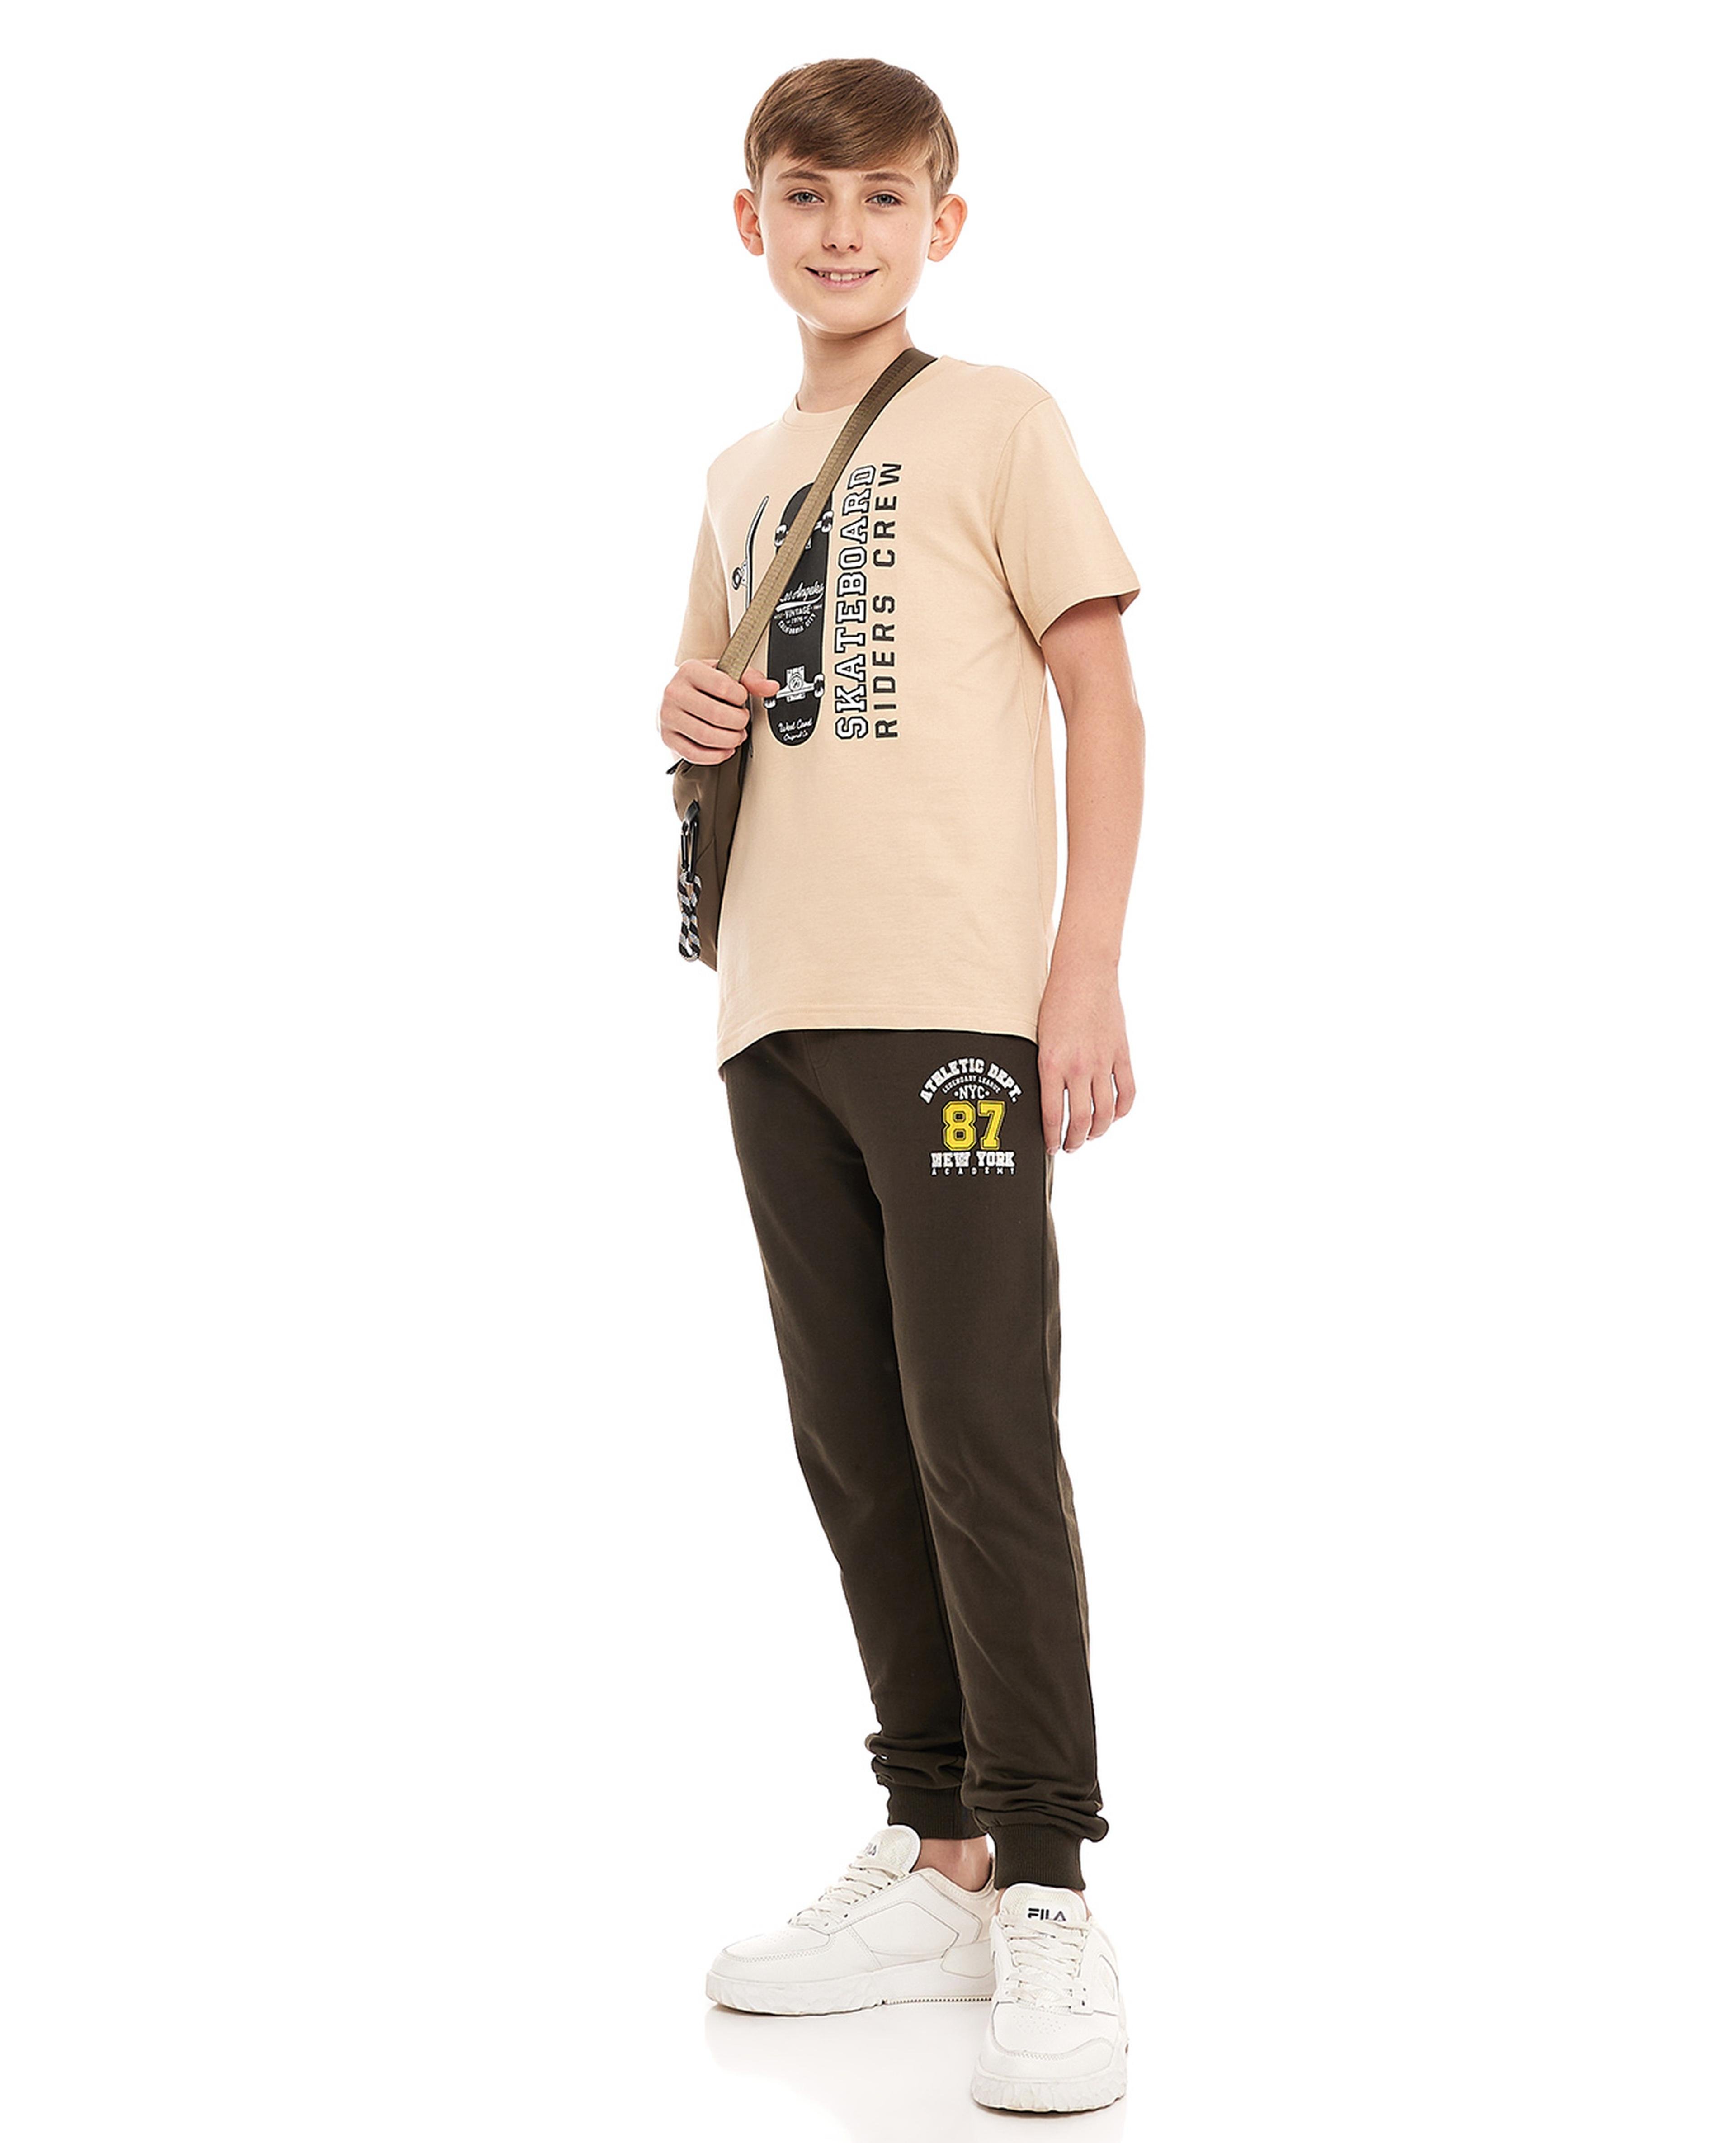 Quilted Jogger Pants for Toddler Boys